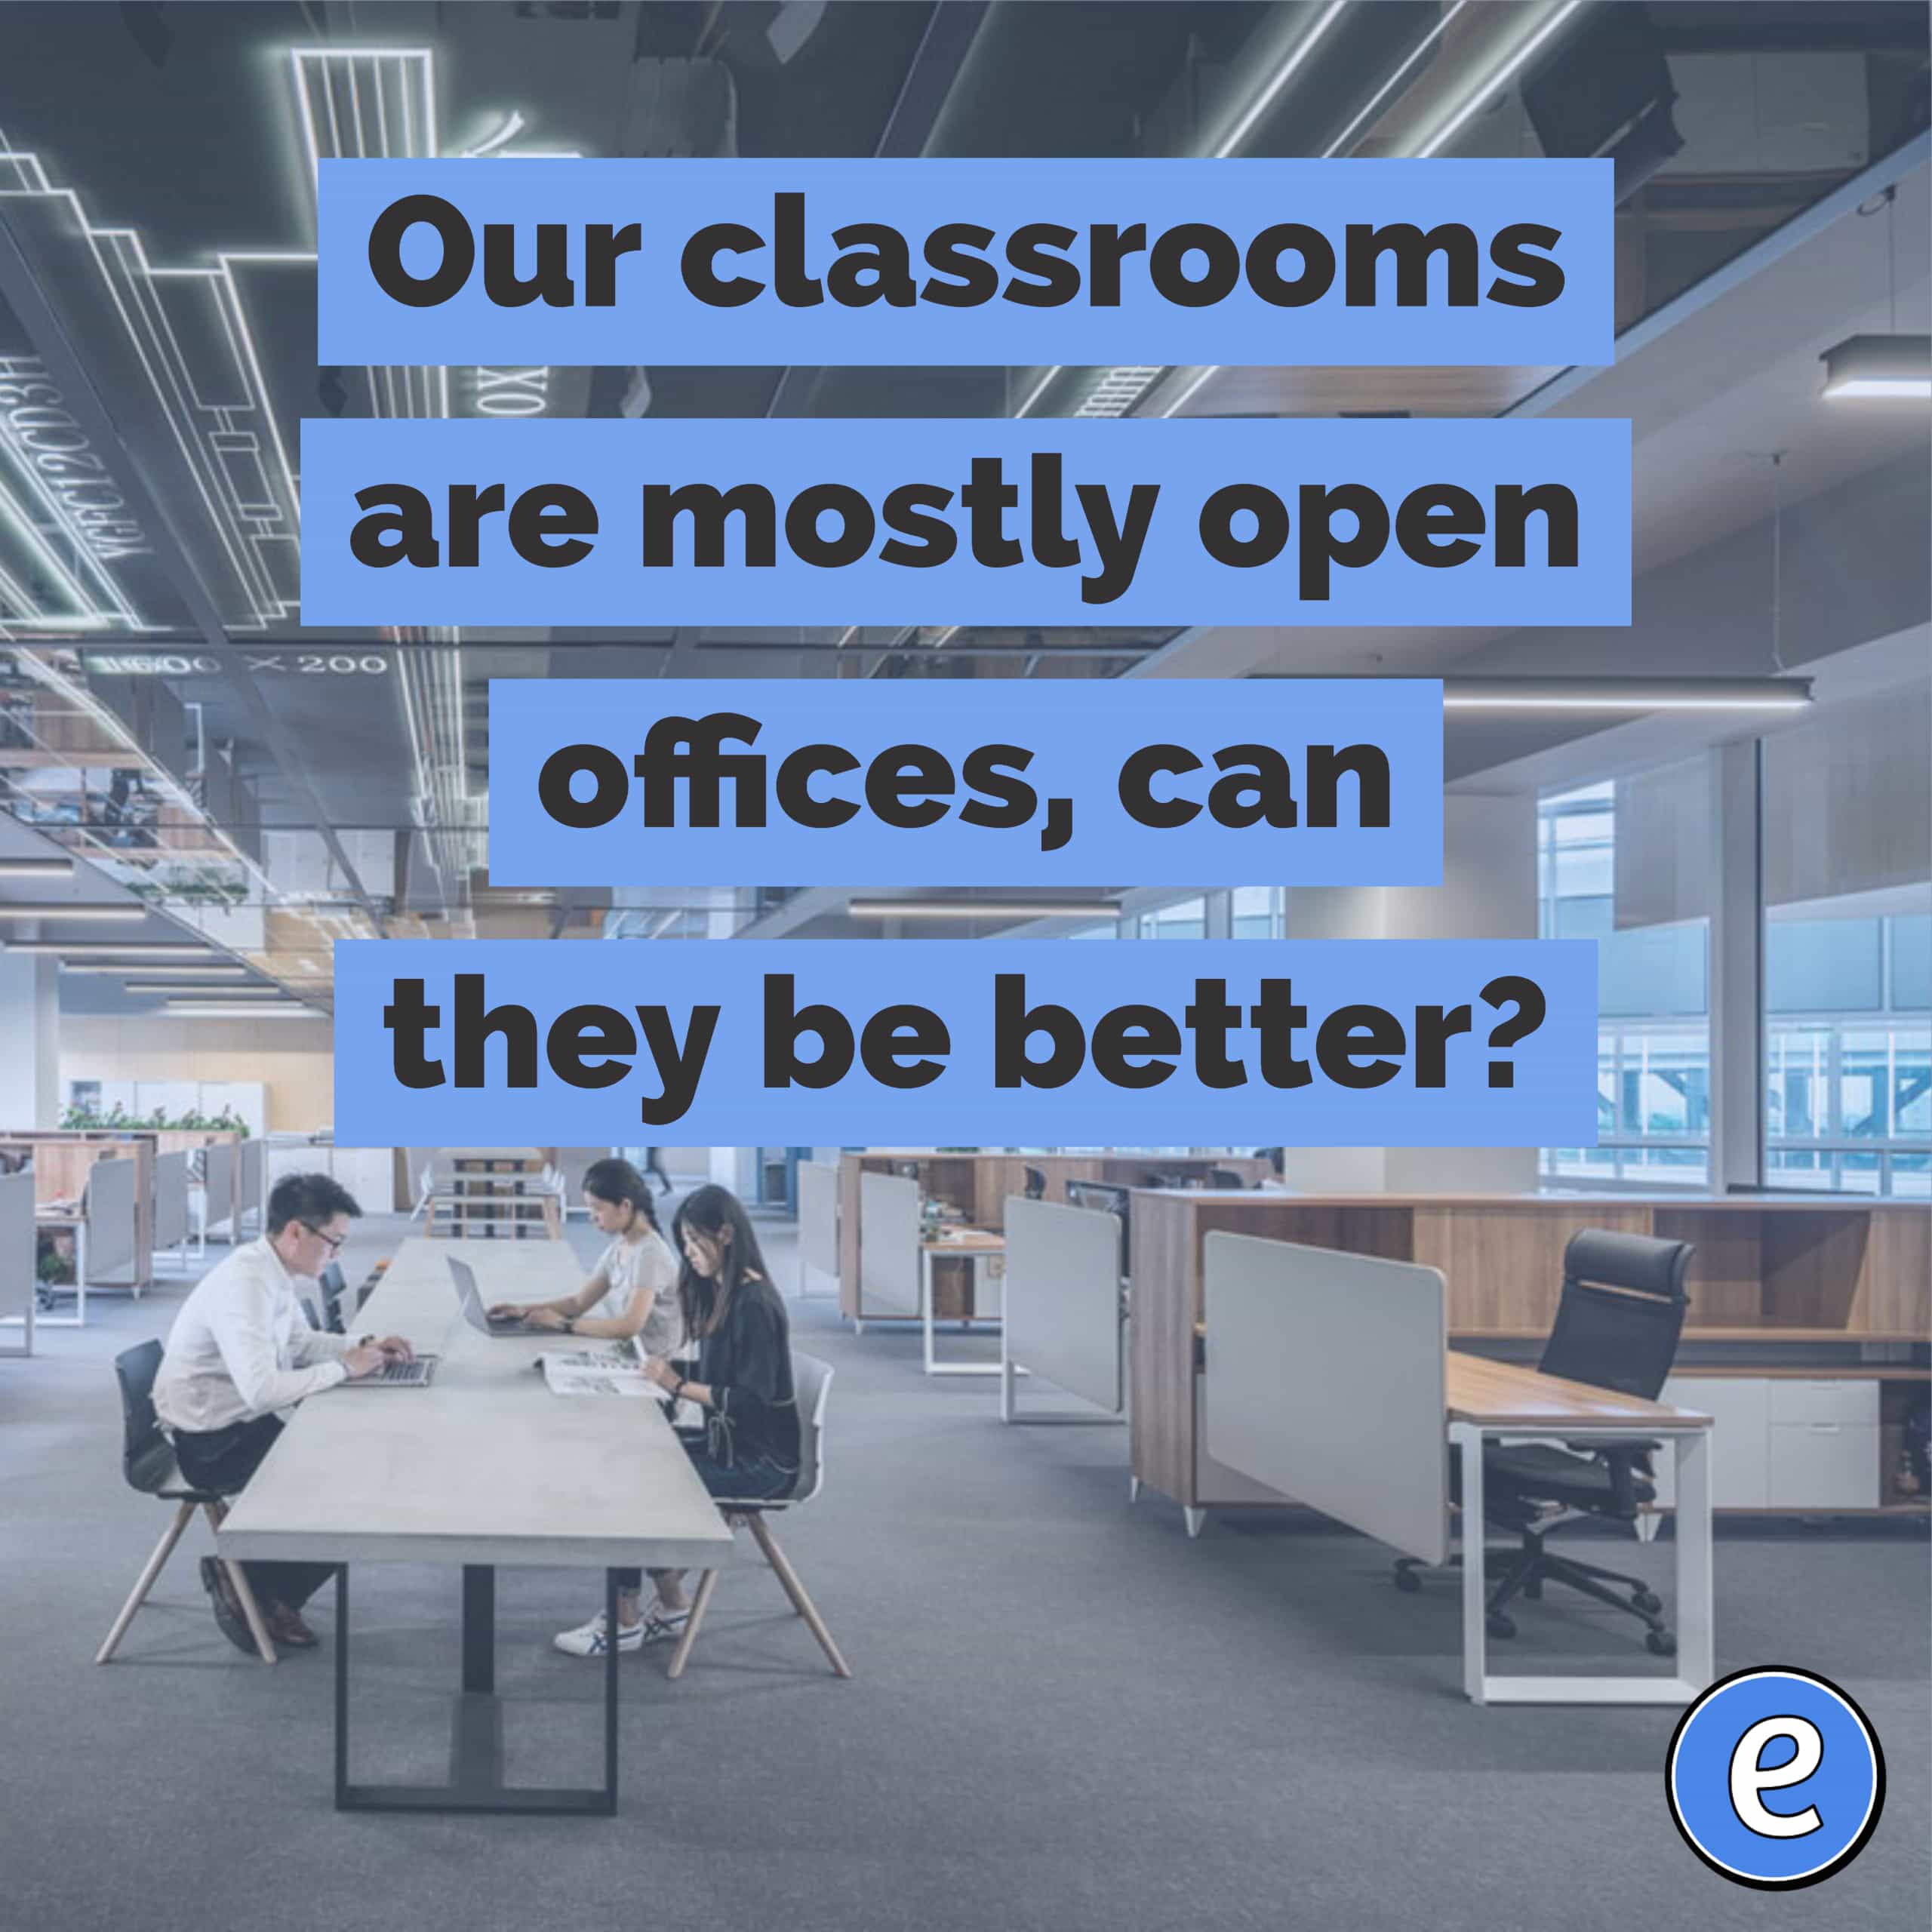 Our classrooms are mostly open offices, can they be better?